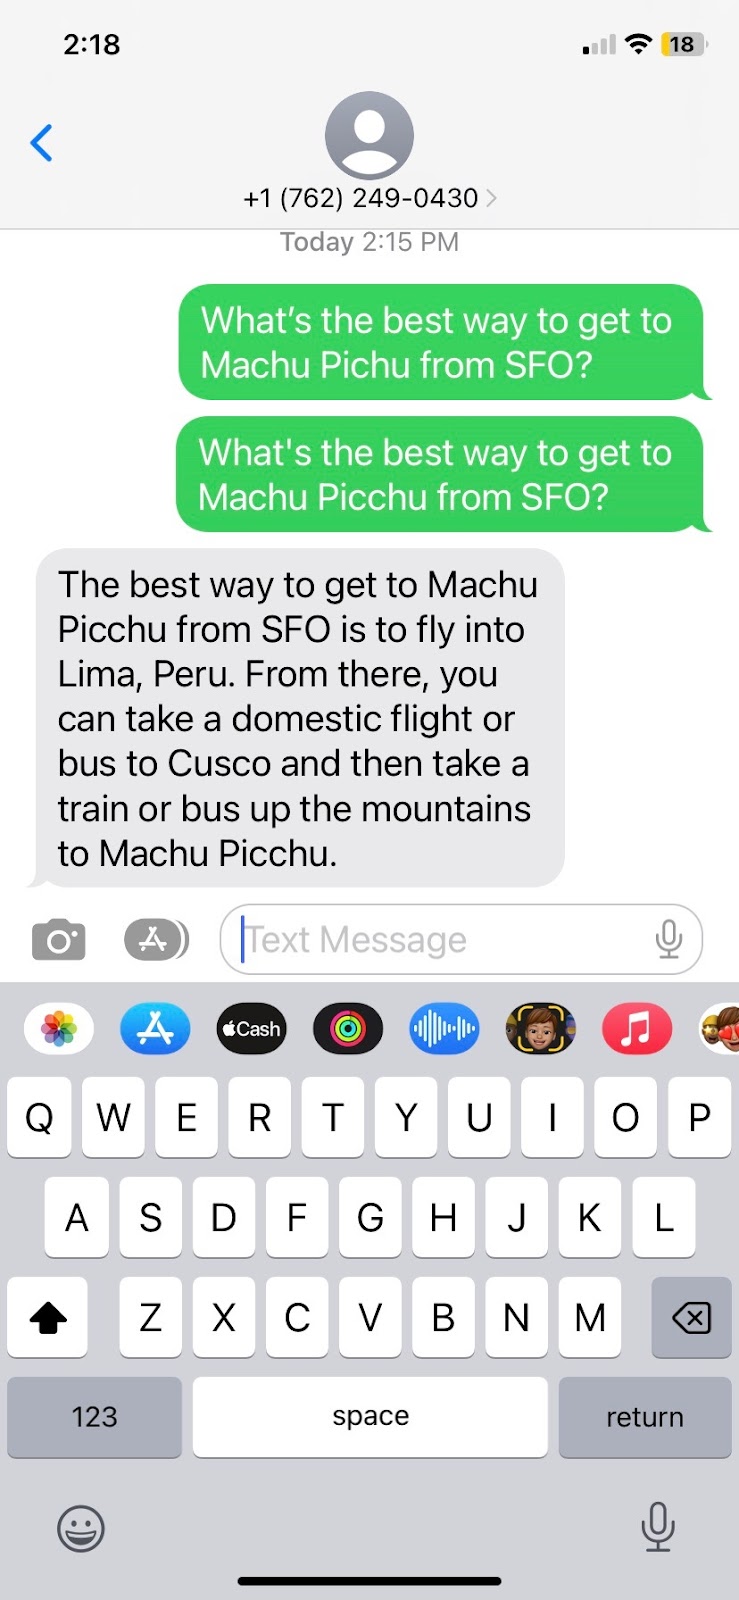 SMS on the best way to get to Machu Picchu from SFO from ChatGPT